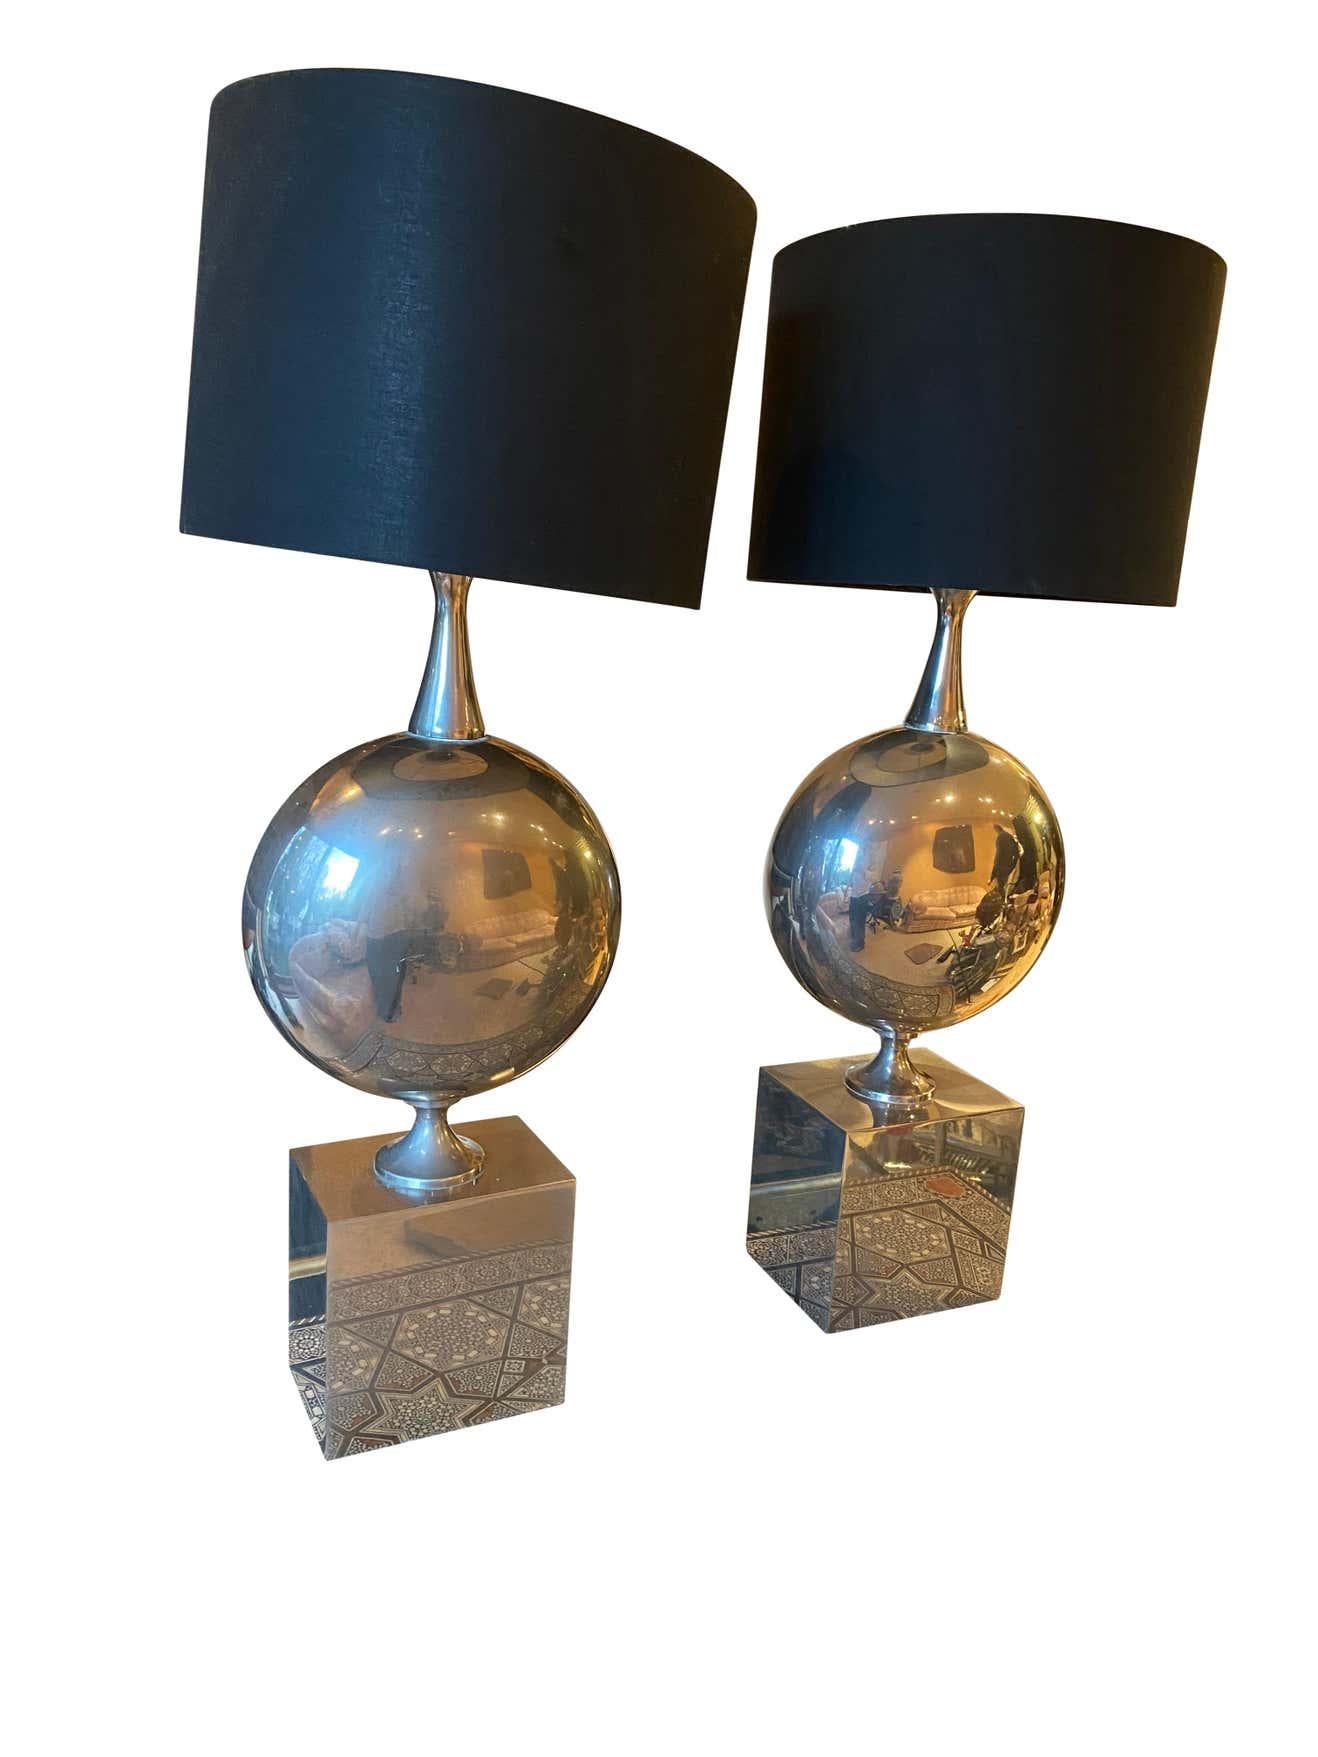 20th Century Maison Barbier Pair of Chromed Steel Table Lamps, 1970s For Sale